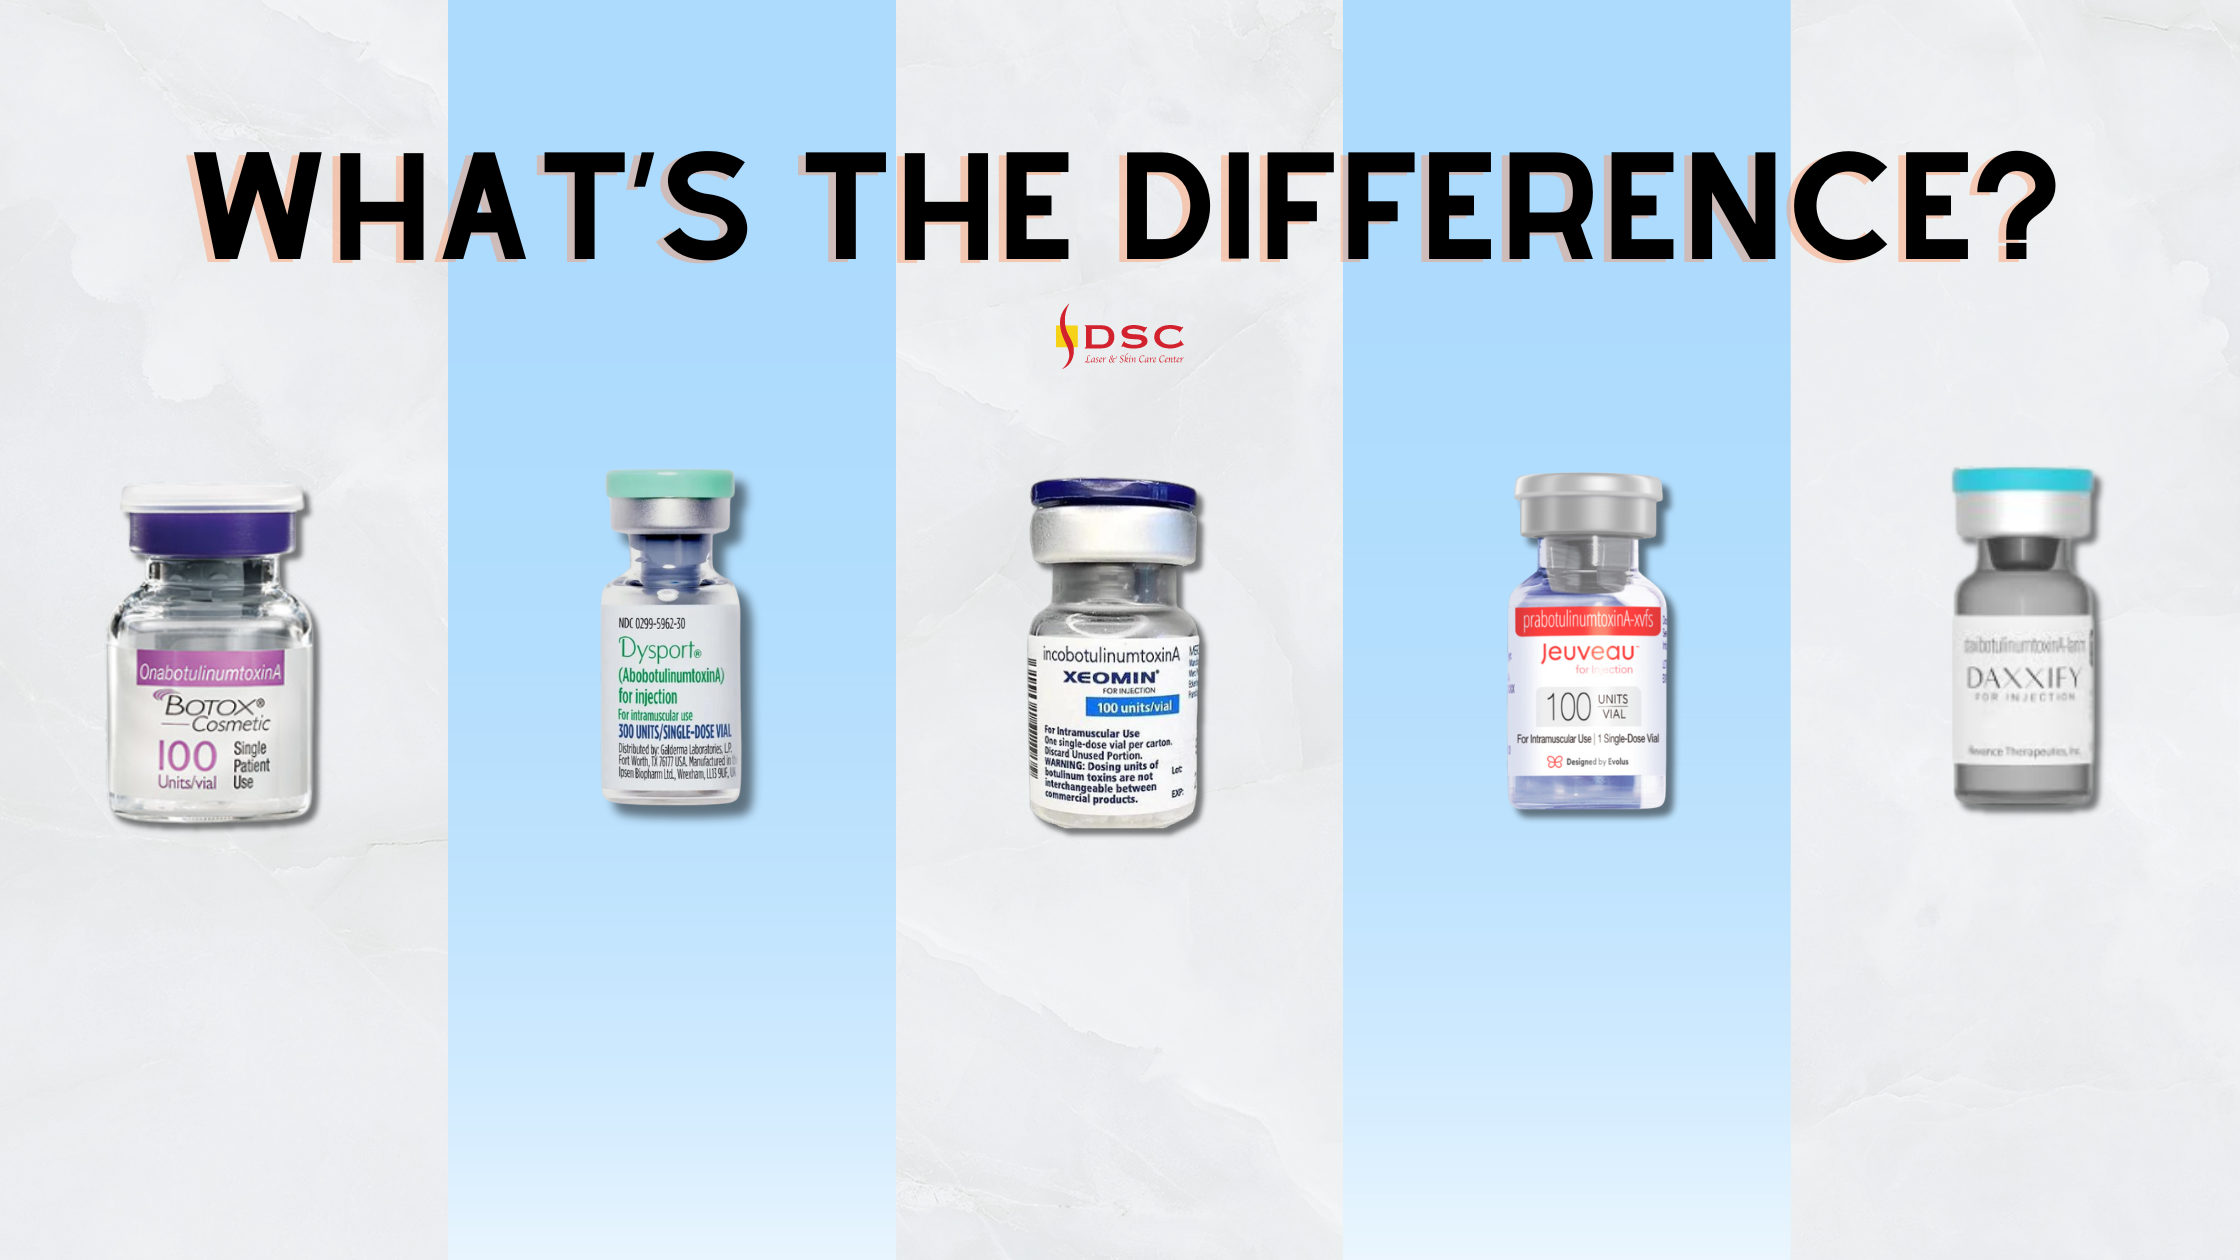 dsc botox vs dysport vs jeuveau vs daxxify blog graphic featuring bottle of Botox, Dysport, Xeomin, Jeuveau, and Daxxify from left to right